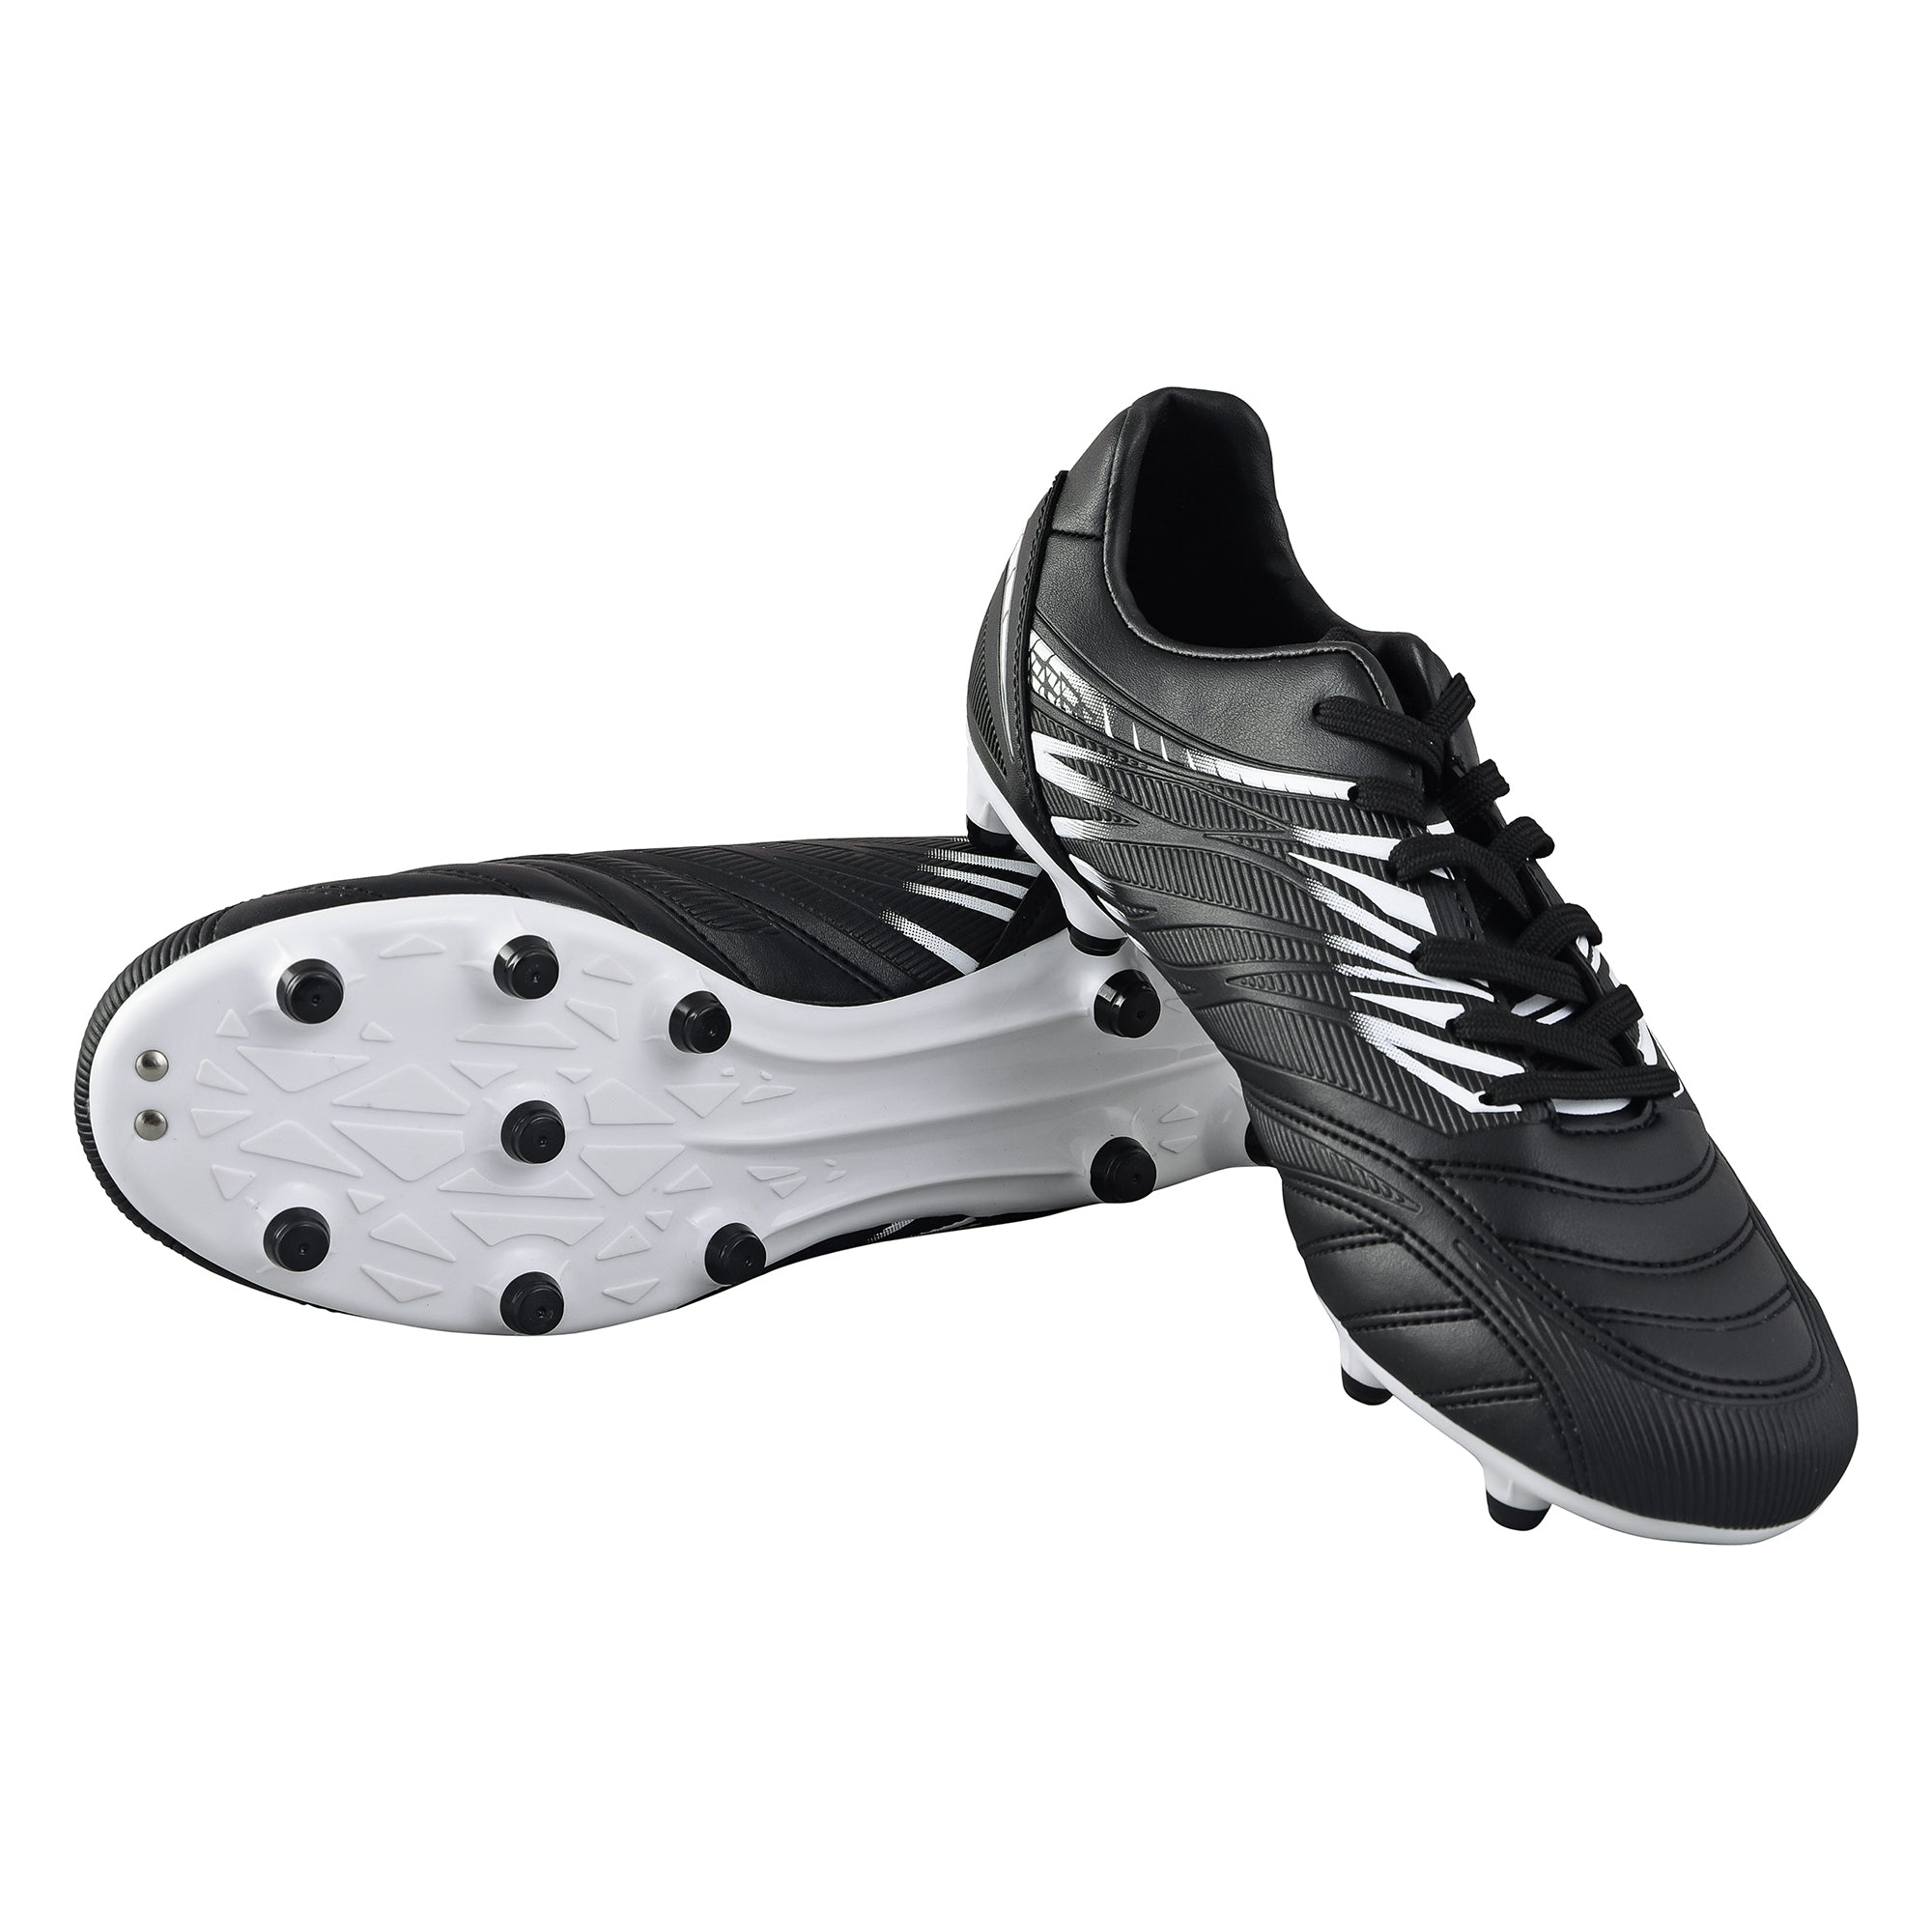 Valencia Firm Ground Soccer Cleats - Black/White